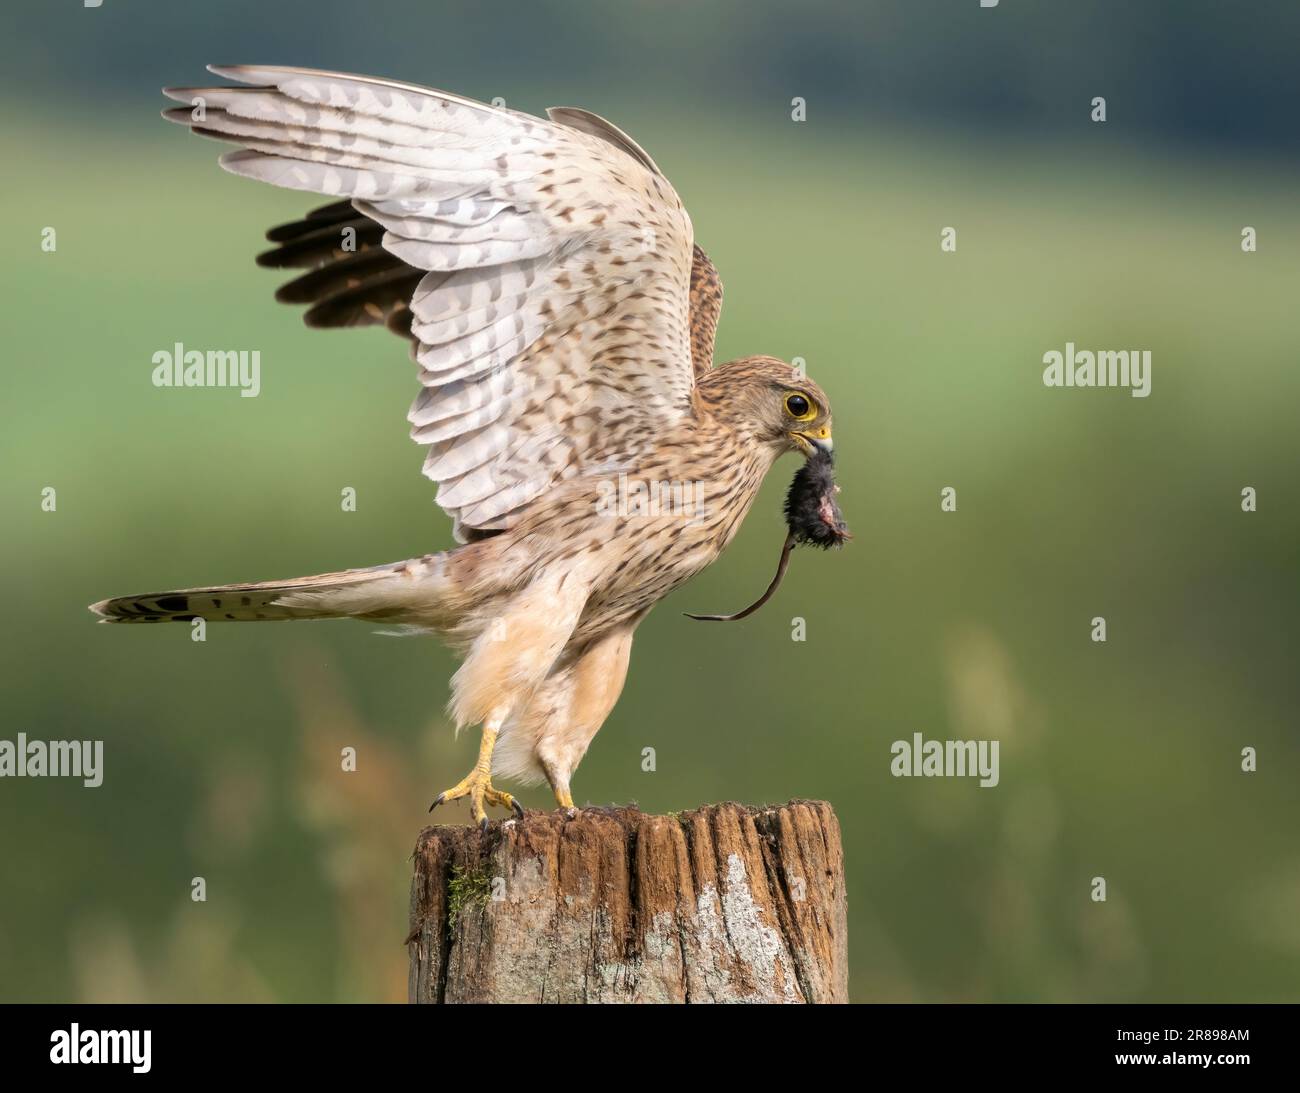 A female Kestrel, (Falco tinnunculus), taking off from an old wooden gate post and holding a dead Field Mouse in it's beak Stock Photo